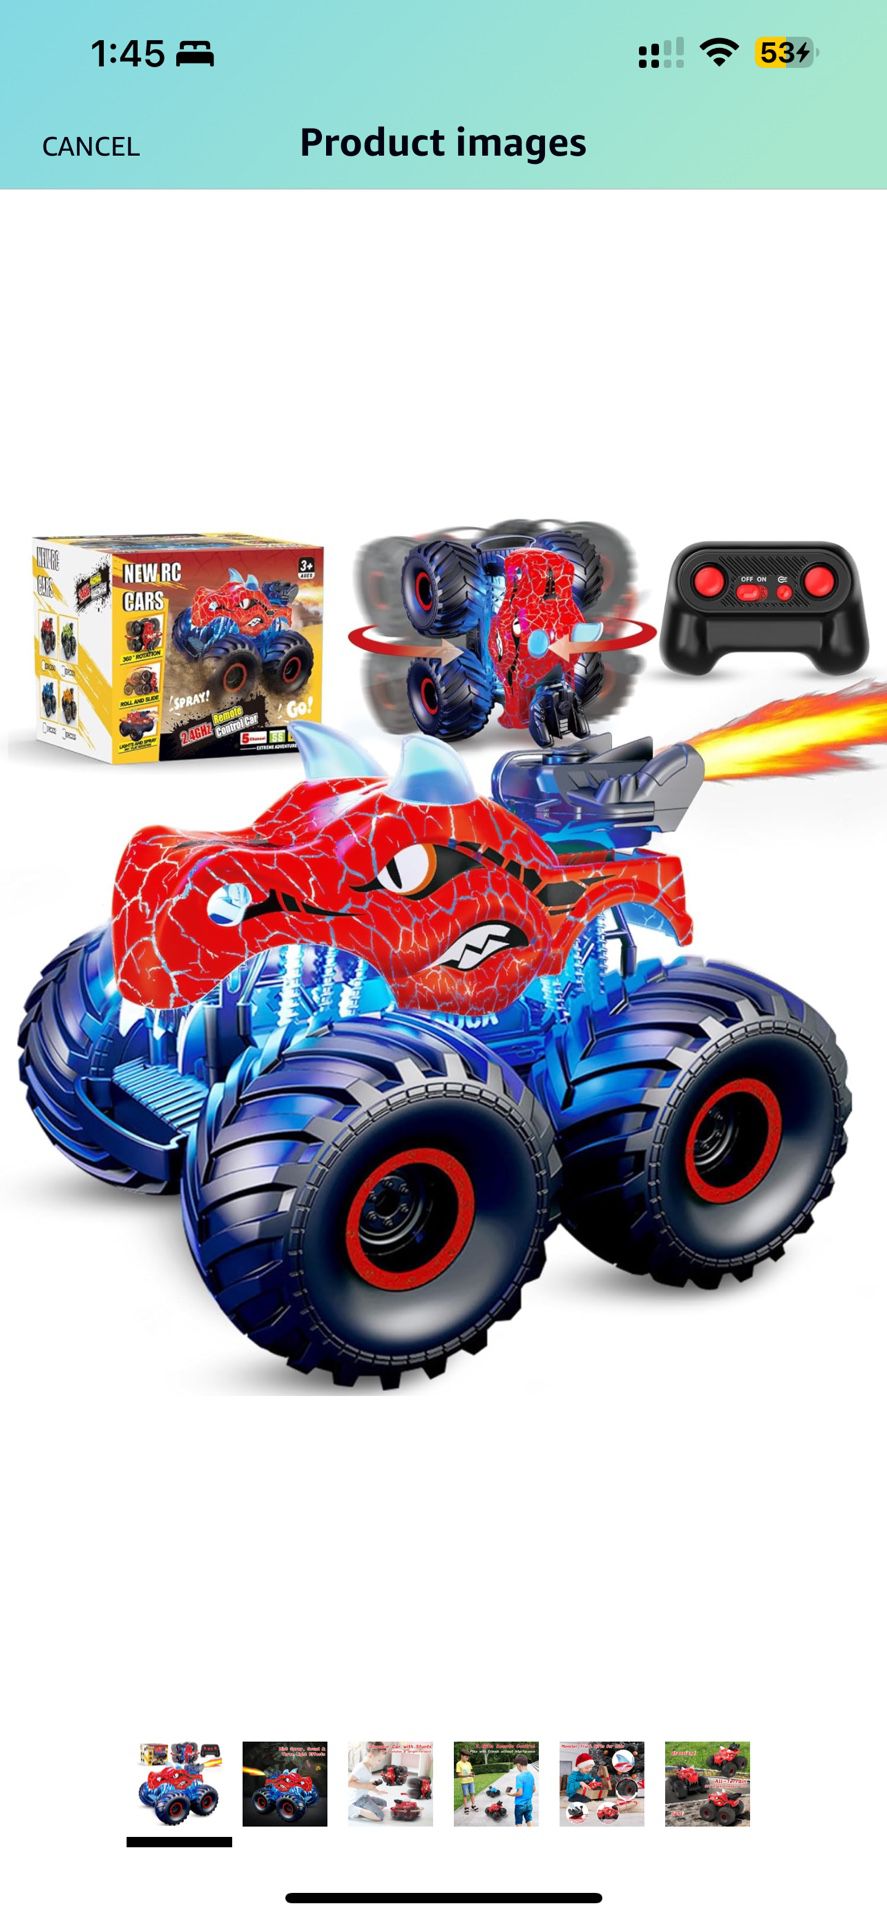 Remote Control Dinosaur Car, 2.4GHz RC Monster Trucks for Boys with Spray, Light & Sound, All Terrain RC Cars with 2 Batteries, Dinosaur Toys for Kids